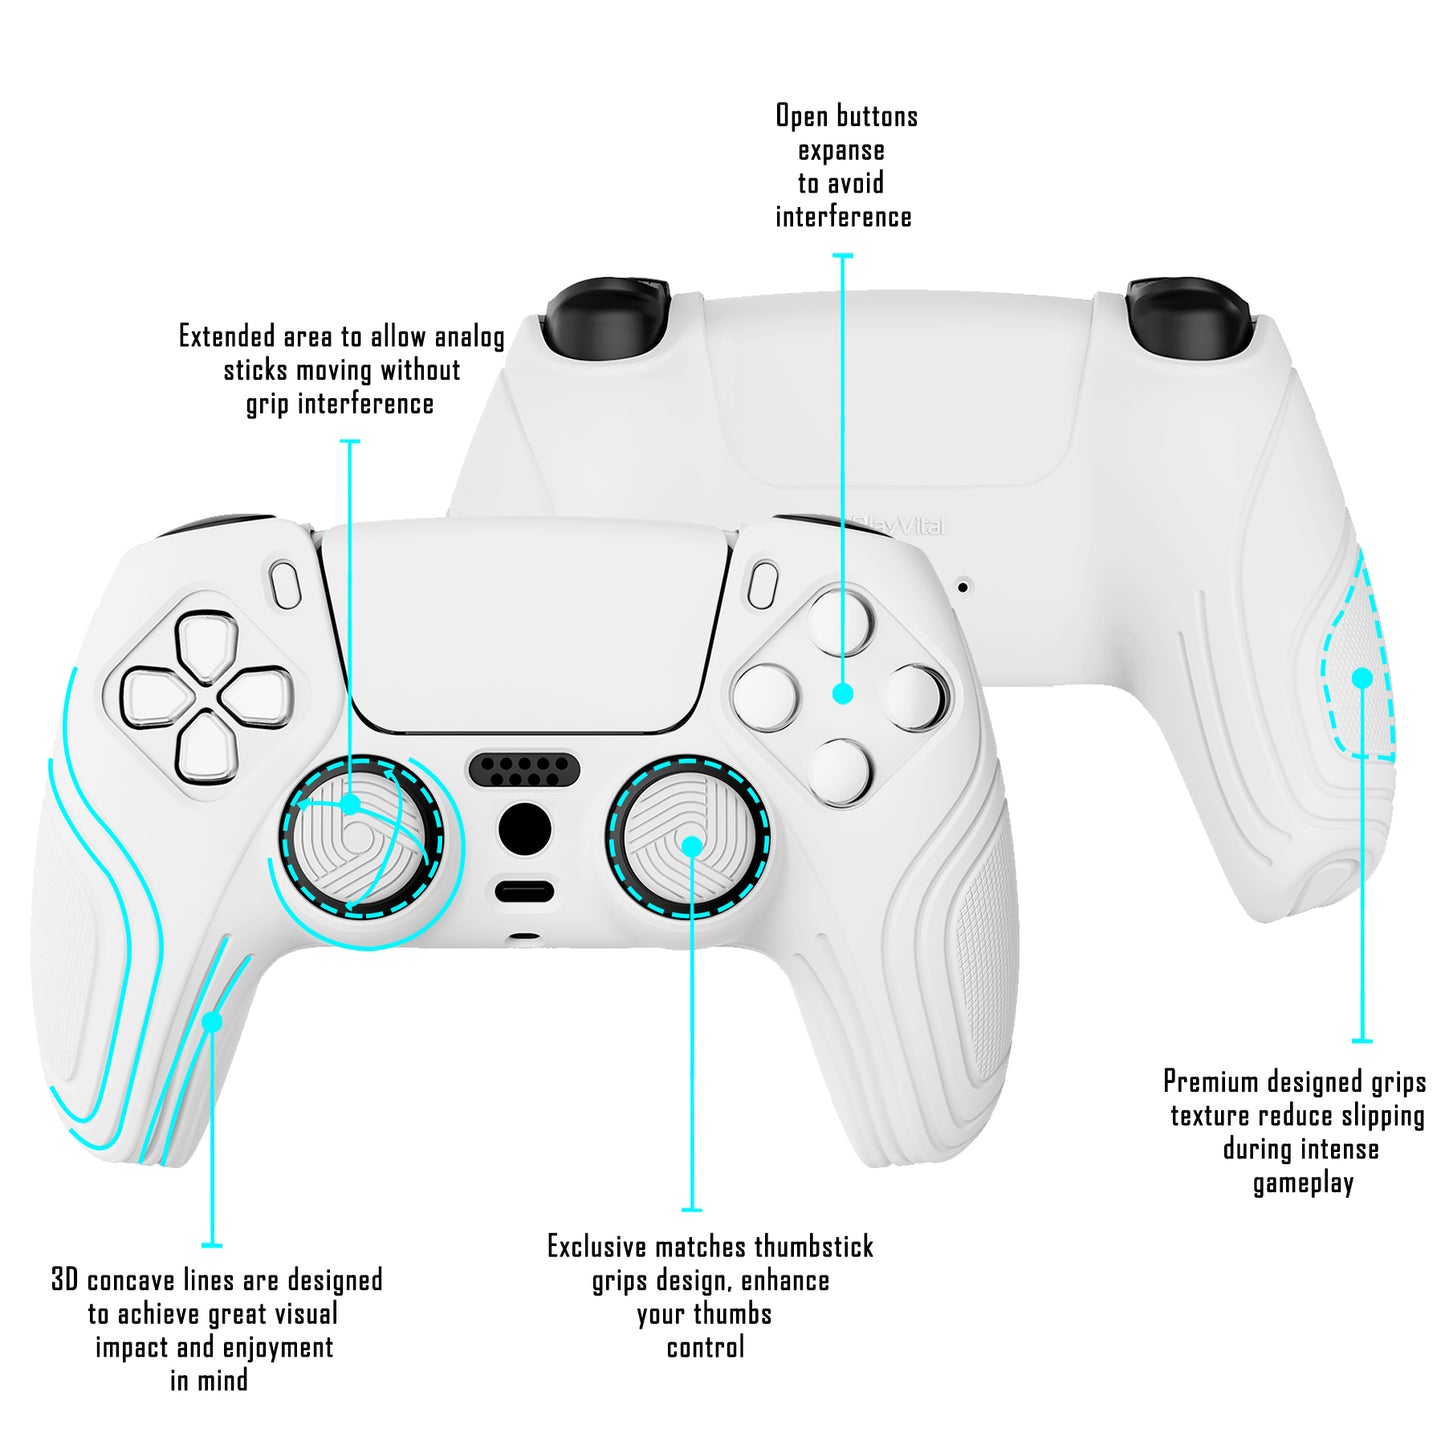 PlayVital Samurai Edition Anti-Slip Silicone Cover Skin with Thumb Grip Caps for PS5 Wireless Controller - White - BWPF002 PlayVital